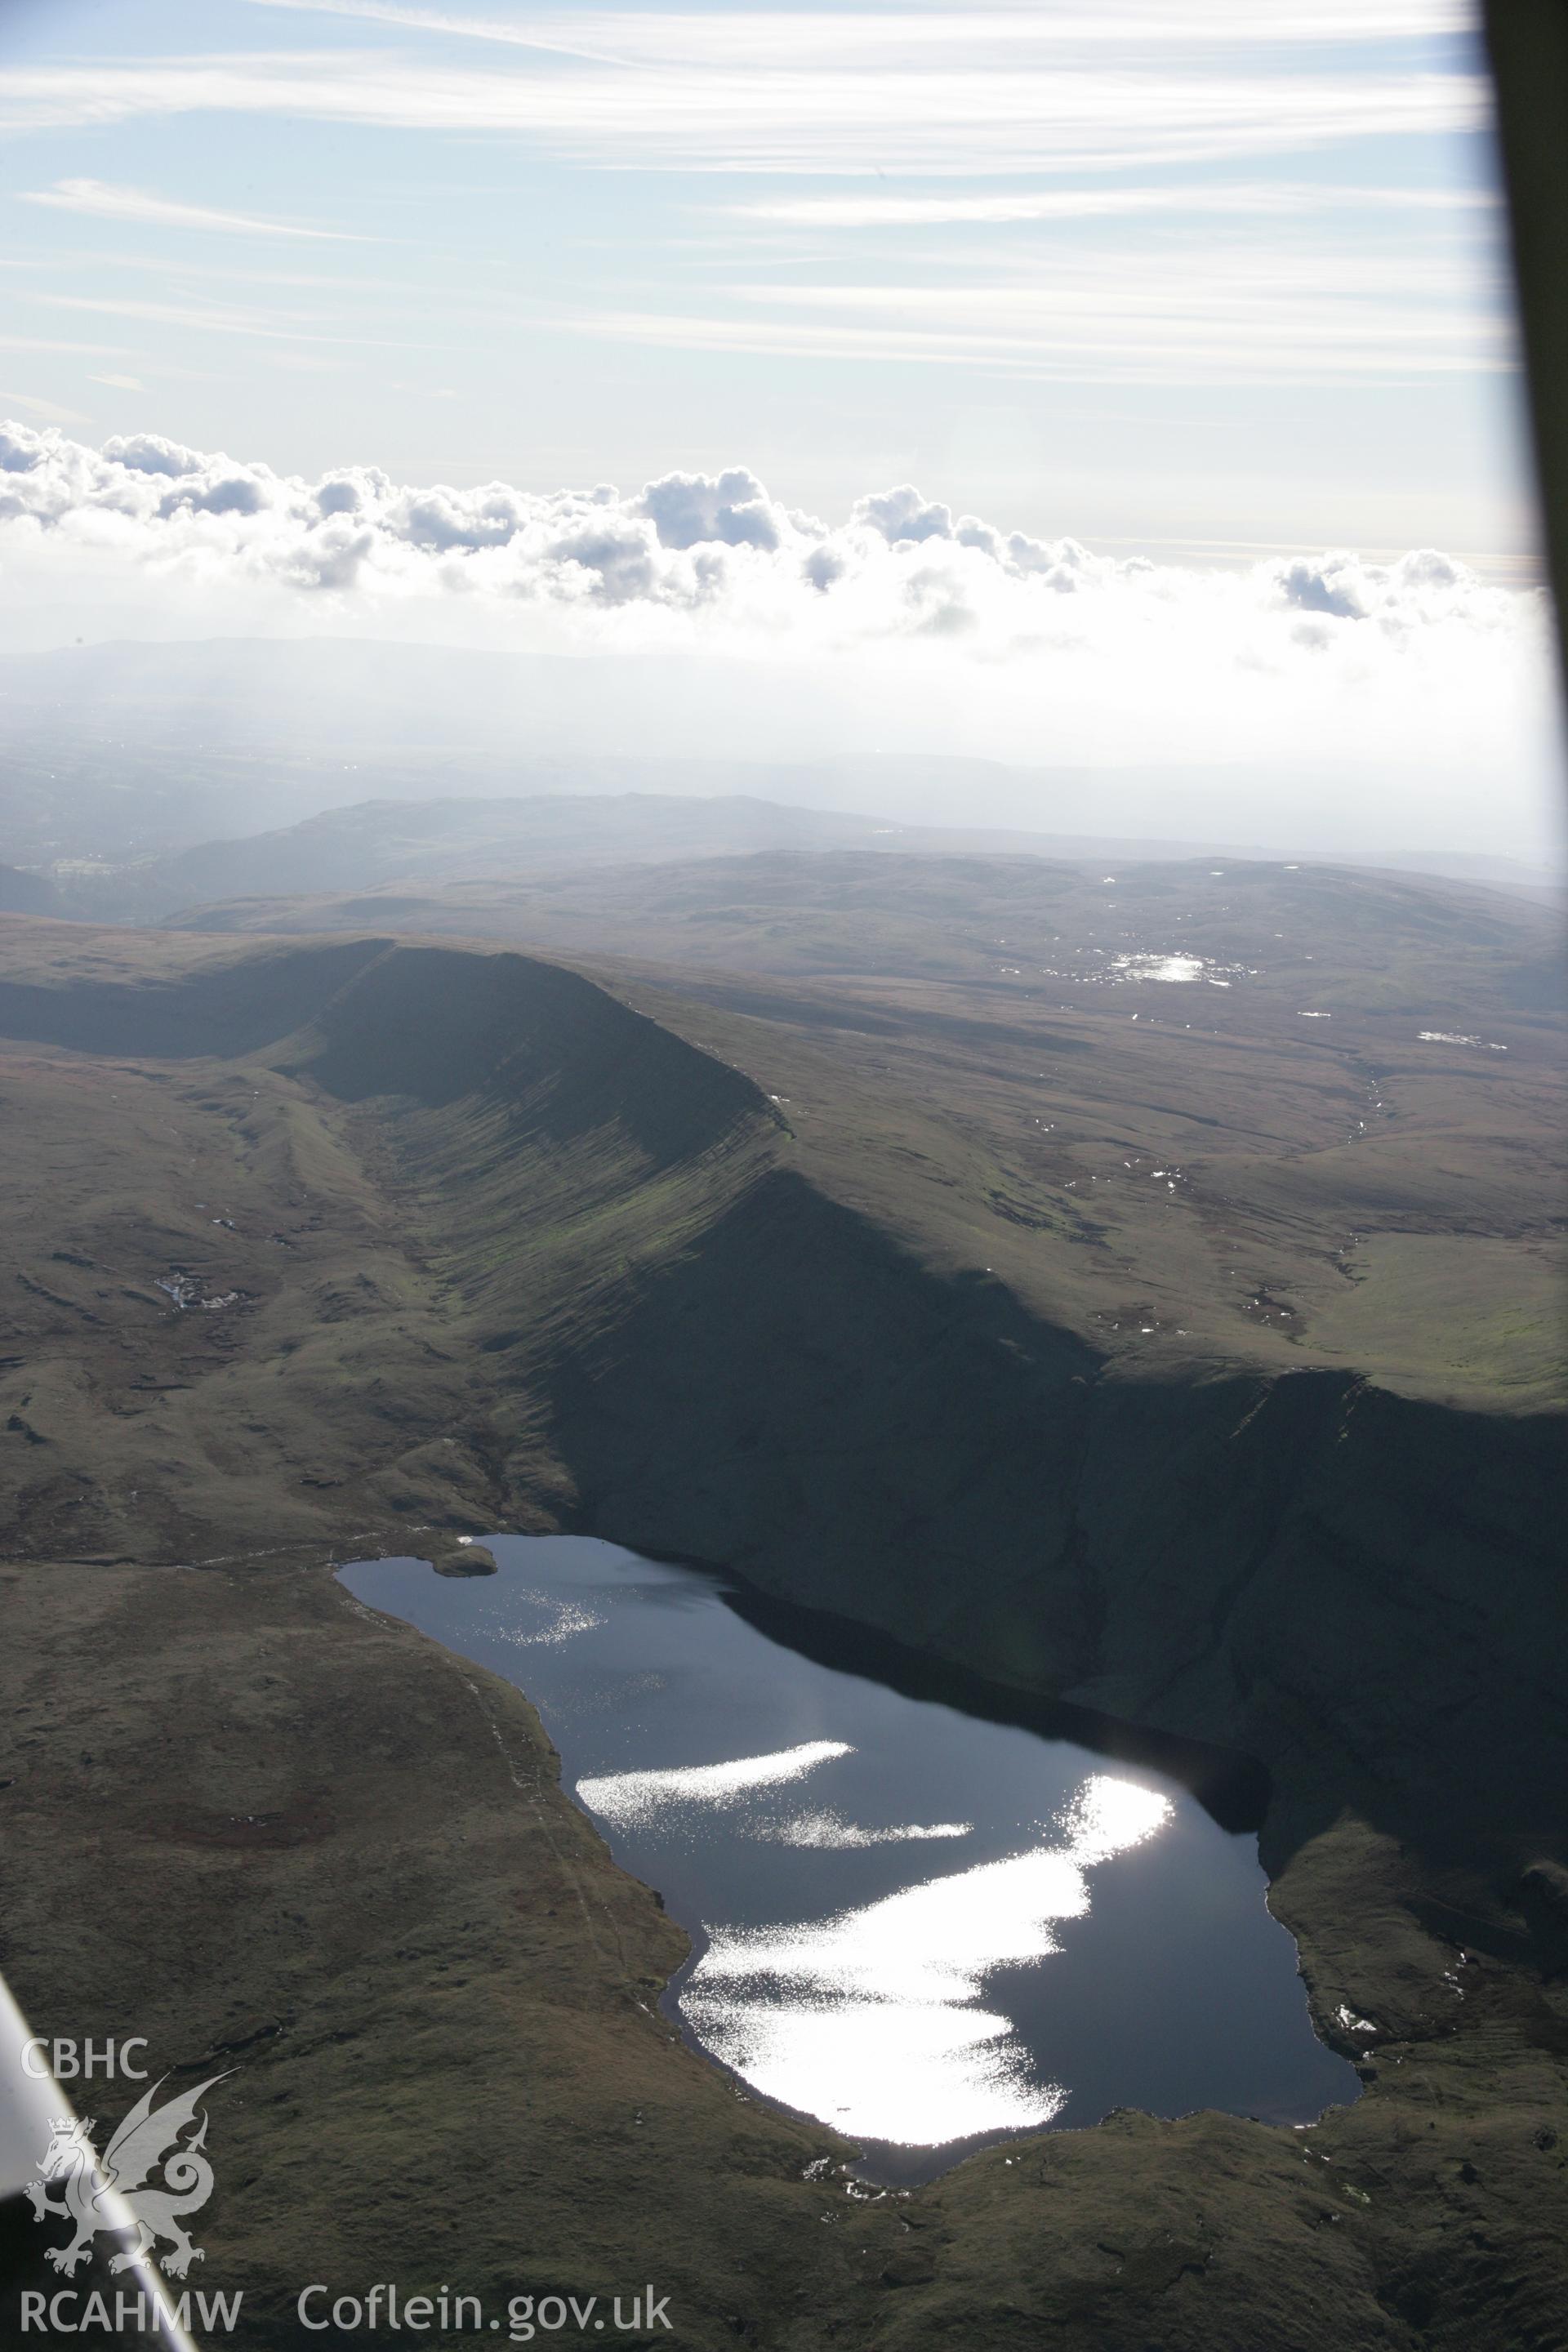 RCAHMW colour oblique photograph of Llyn y Fan Fawr, lake, view looking south. Taken by Toby Driver on 17/11/2005.